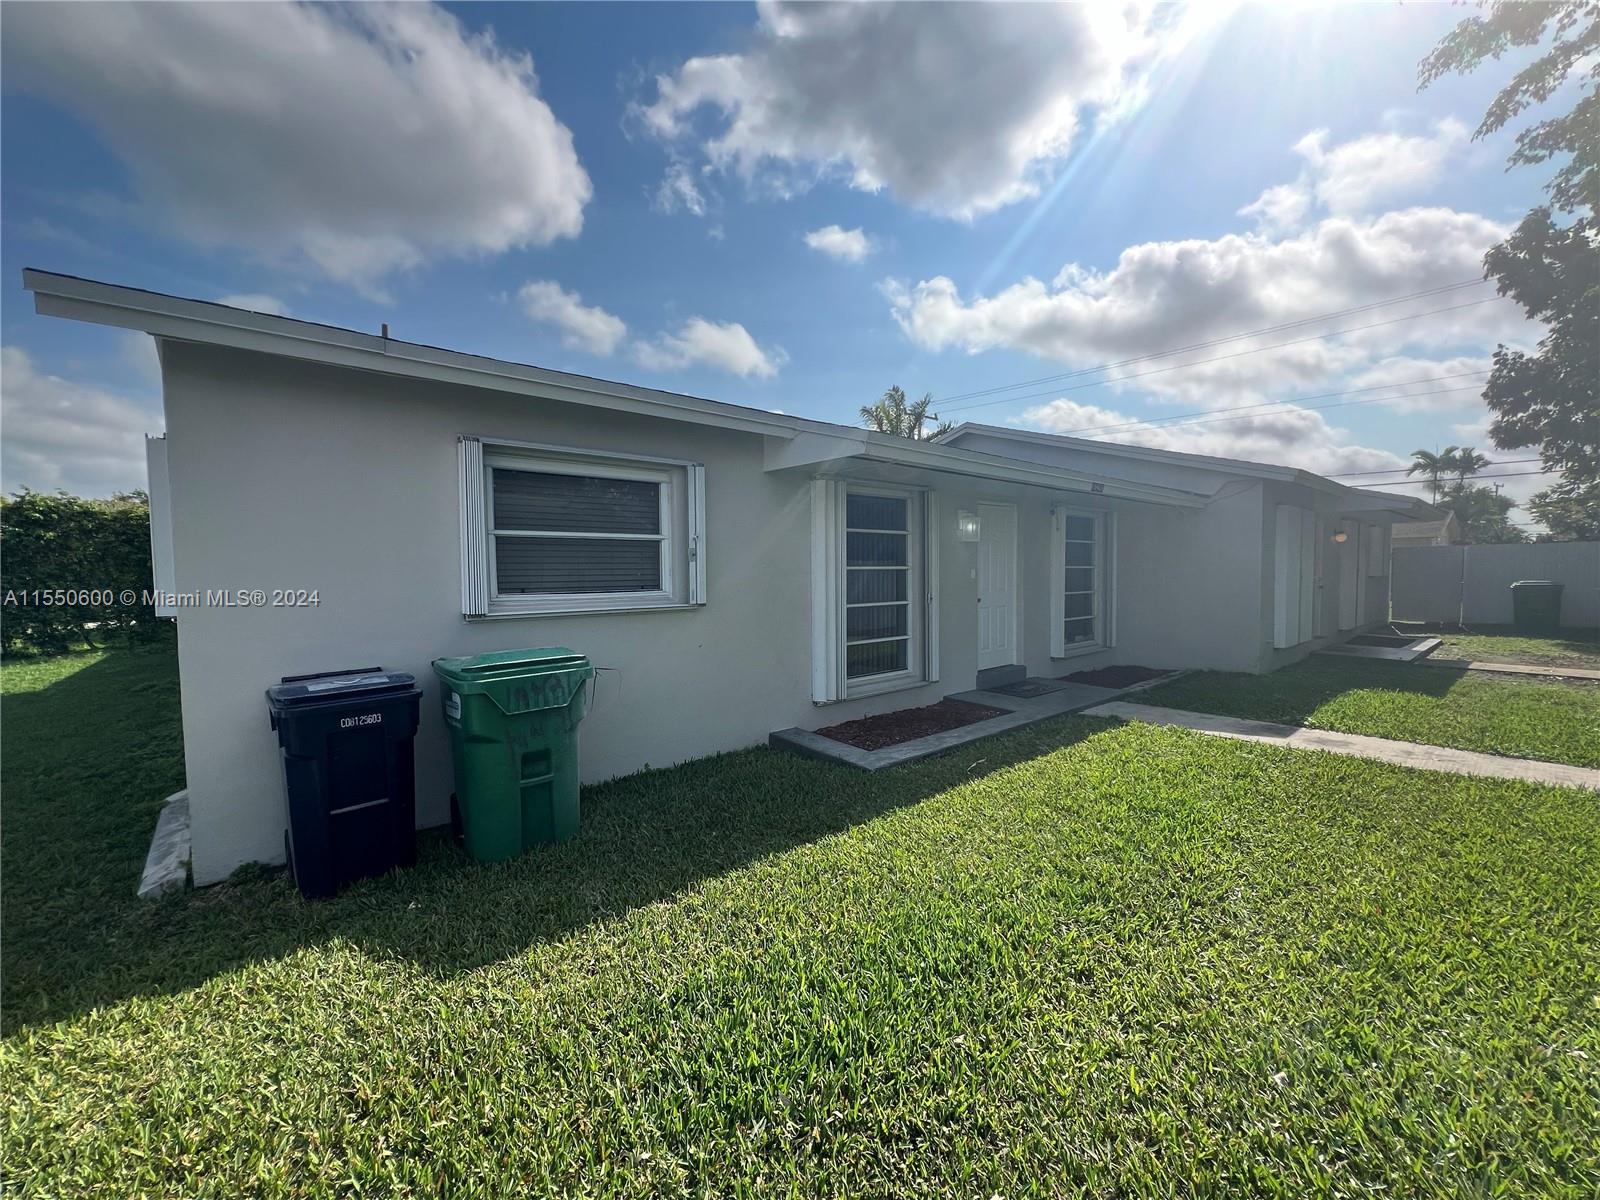 This cozy duplex in Cutler Bay boasts 3 bedrooms, 1 bathroom, and an open living/dining area. Conveniently located just 2 blocks from US-1 and 2 minutes from Florida Turnpike exit 12, it offers easy access to amenities. With a laundry room included and no HOA approval required, it's ready for immediate move-in. Perfectly situated near shopping centers and urgent cares, this vacant unit is ideal for hassle-free living.